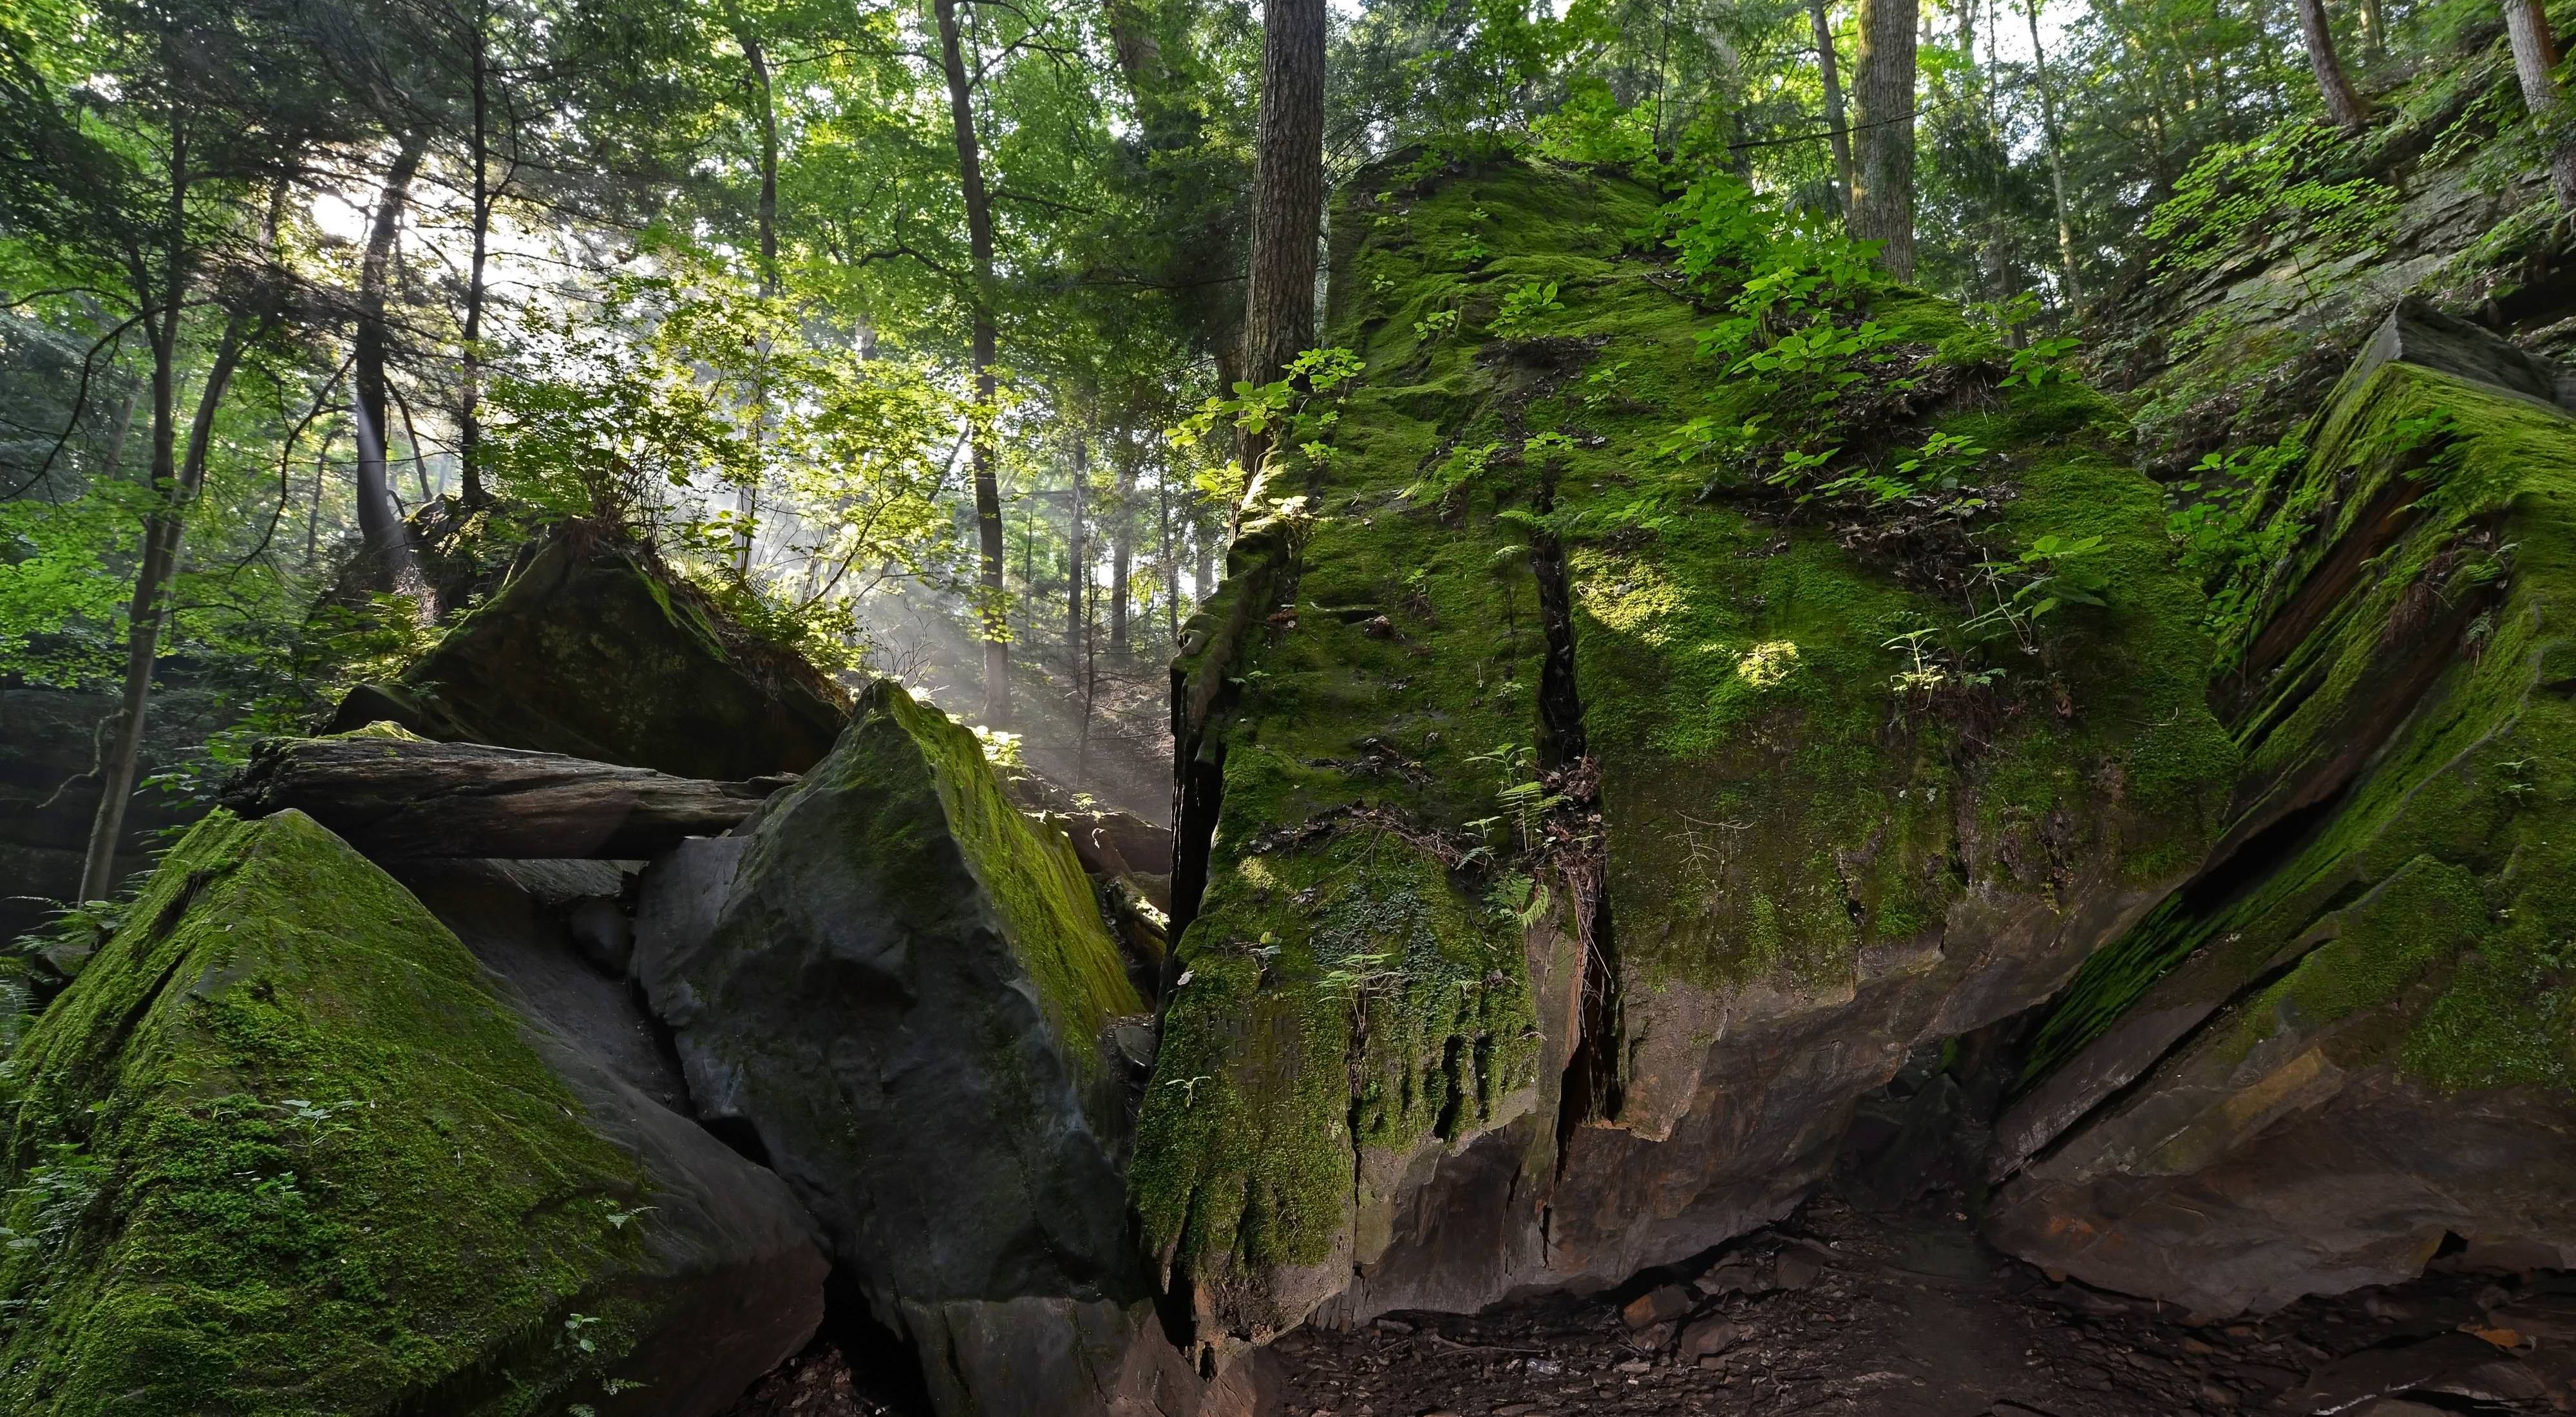 Large boulders covered in moss in a shady forest.